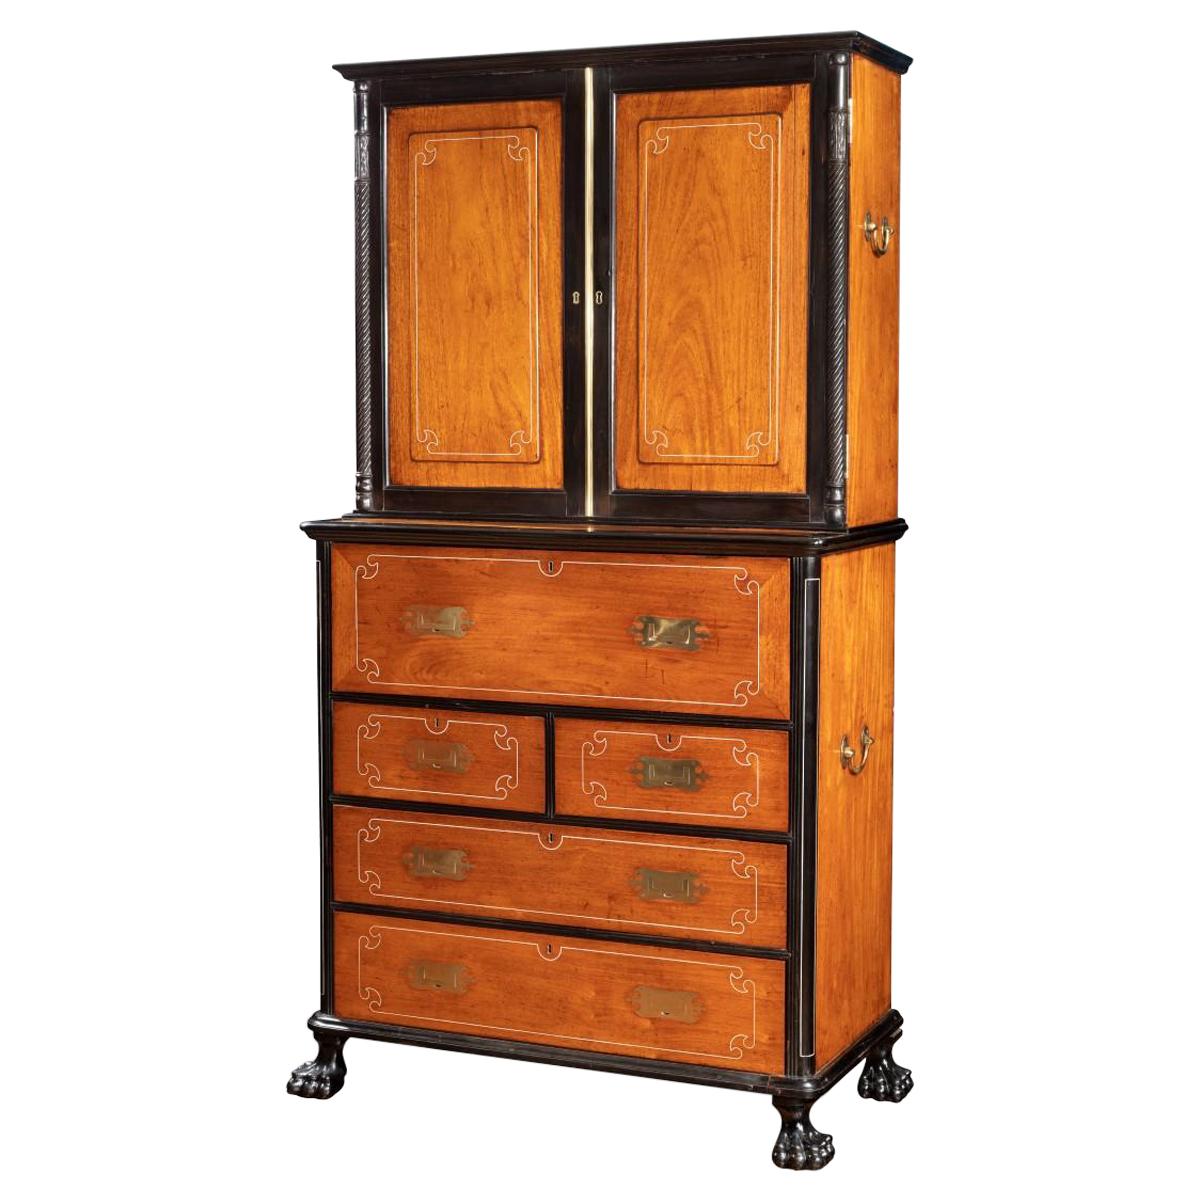 Anglo-Chinese Camphor and Ebony Campaign Secretaire Bookcase